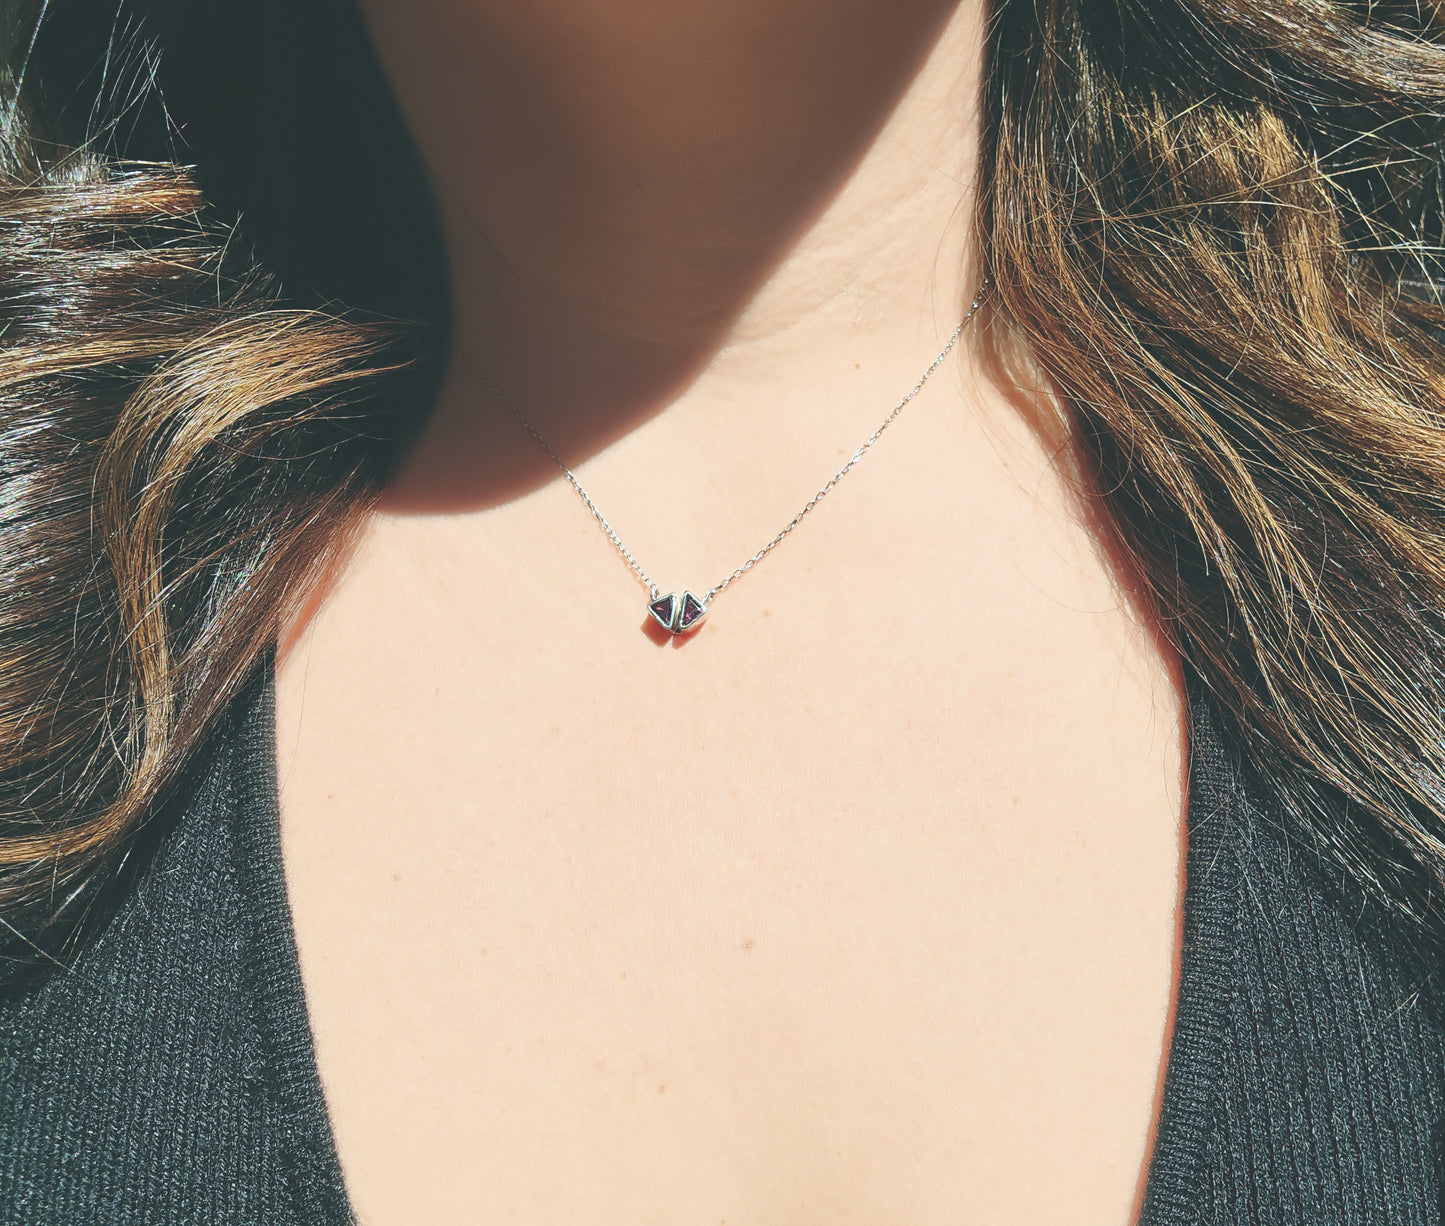 Small Asymmetrical Triangle Ruby Necklace